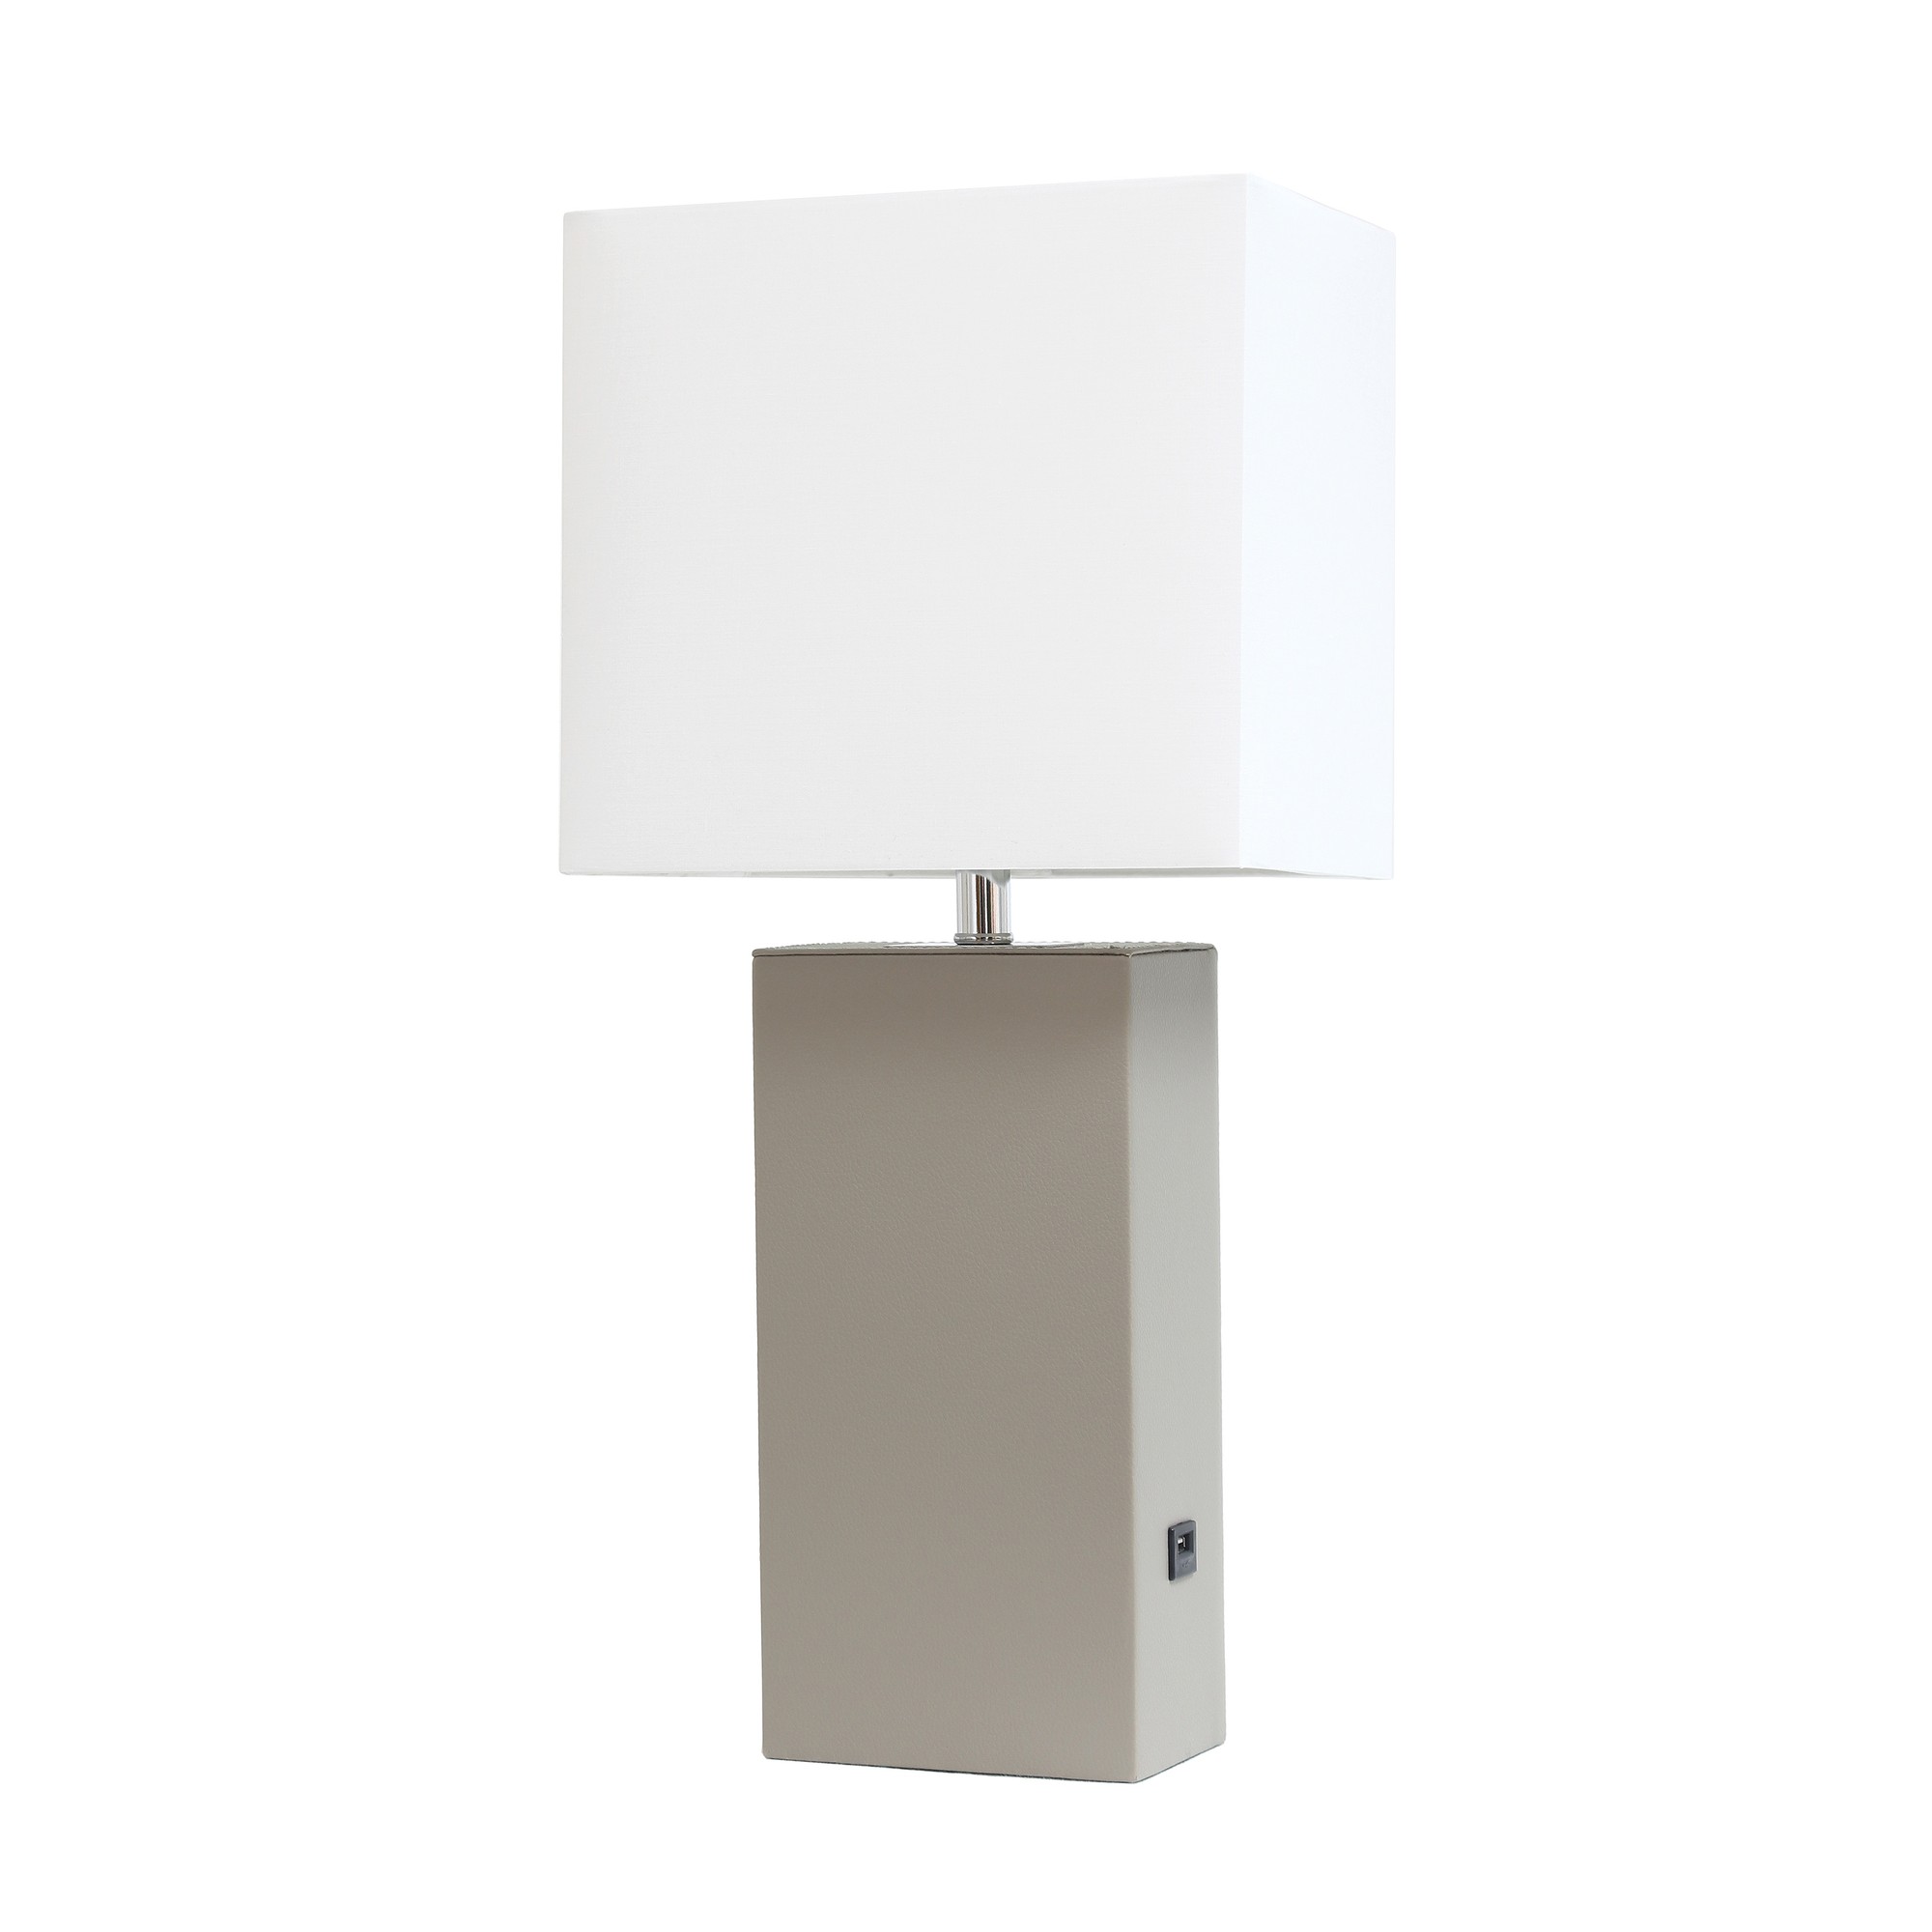 21in Table Lamp USB Charg Port White Shade Gray